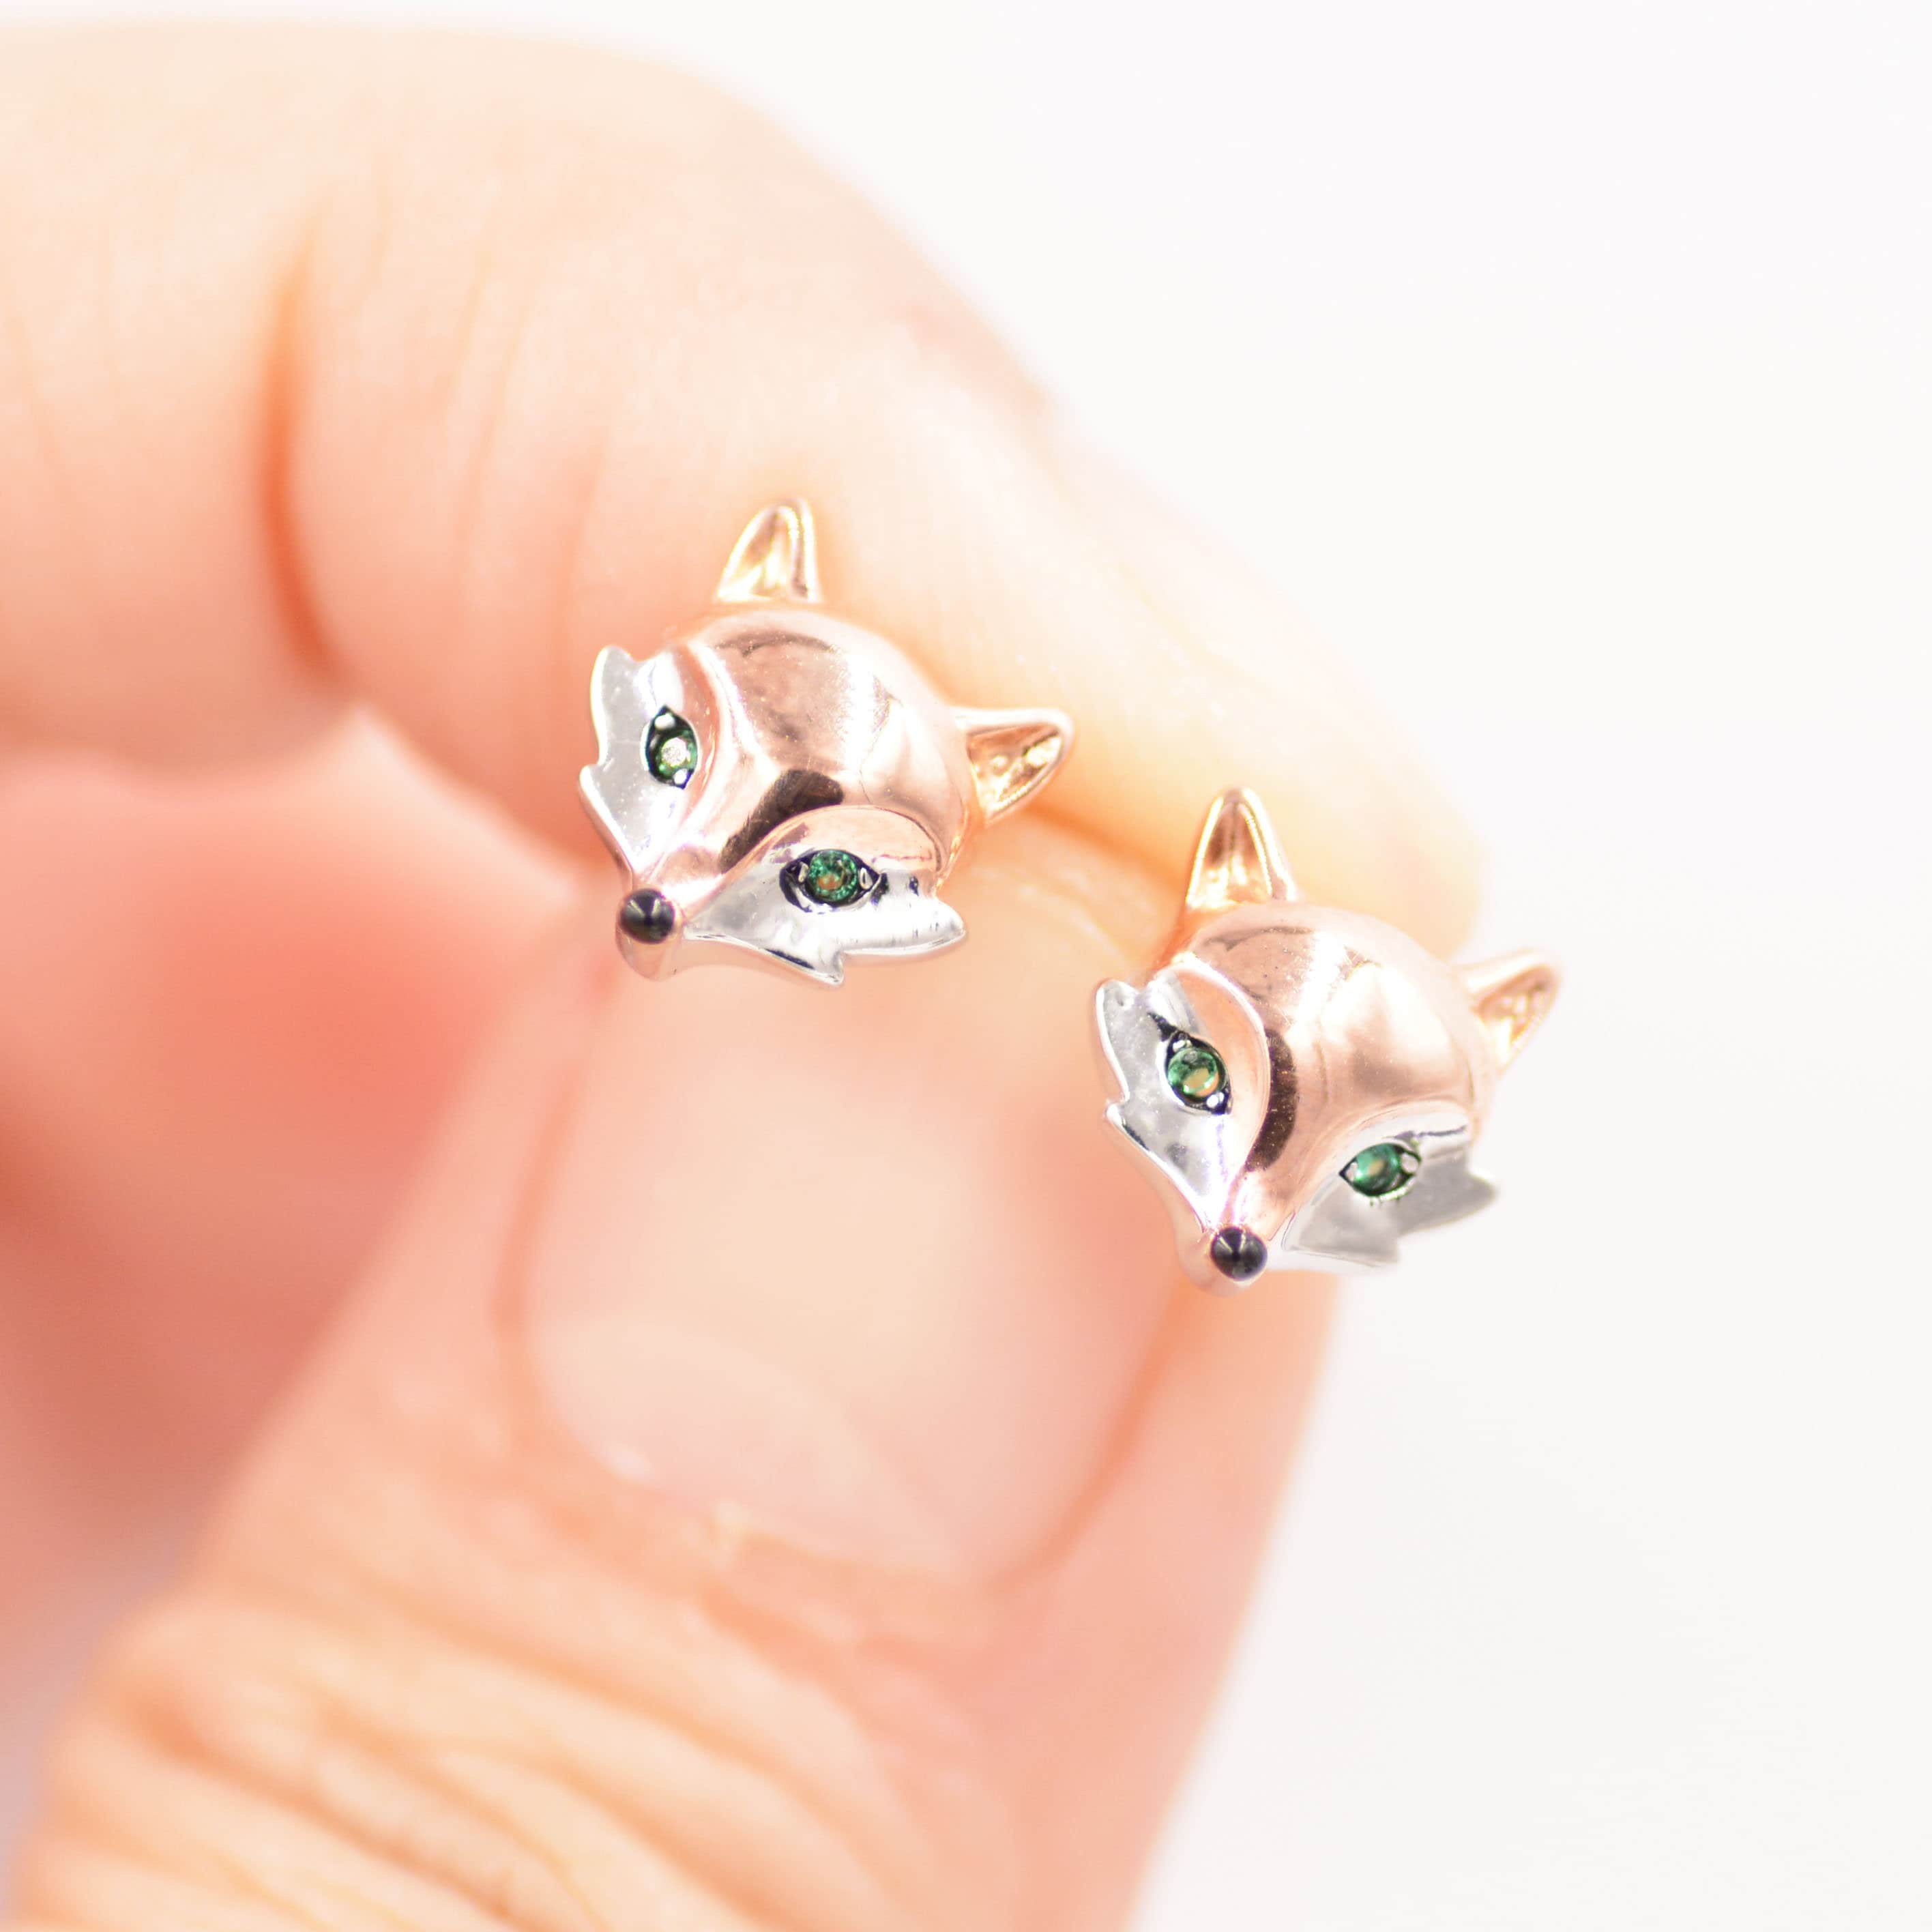 Little Red Fox Face Shaped Stud Earrings in Rose Gold with Rhinestones